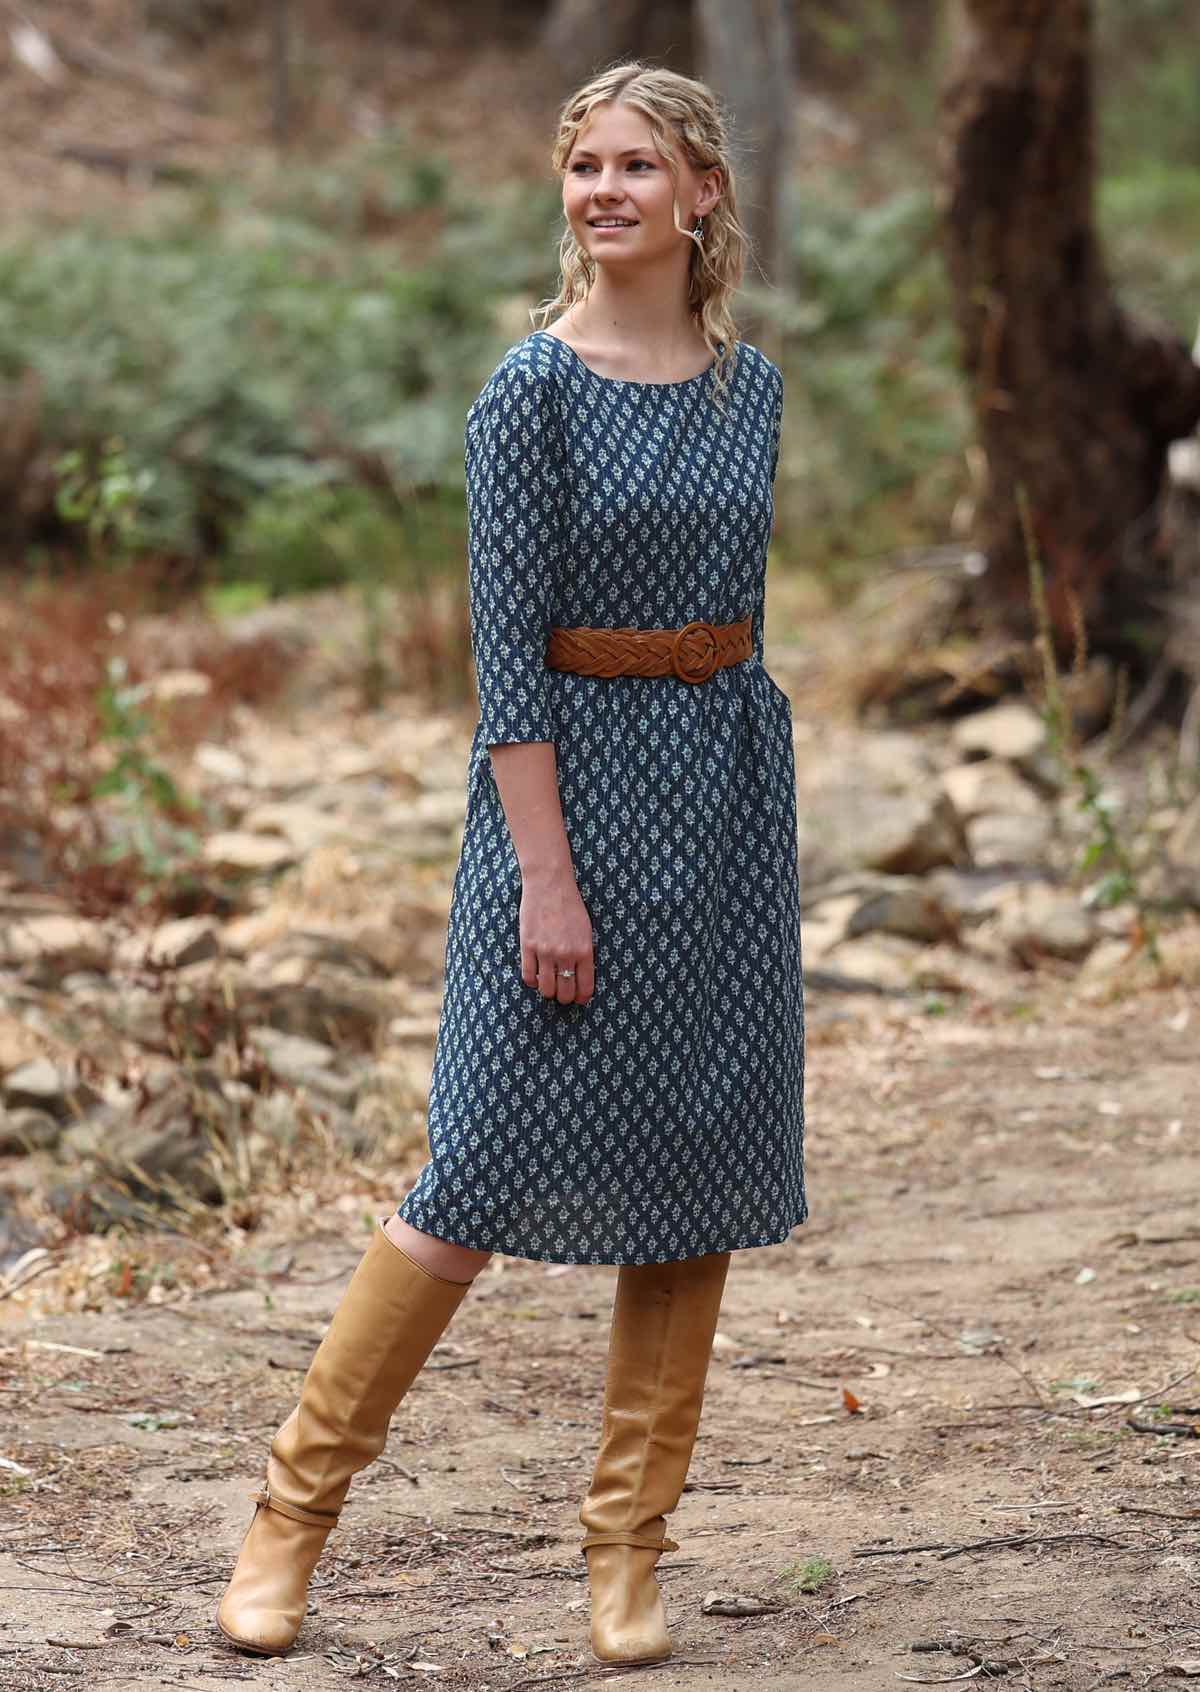 Cotton dress with 3/4 sleeves looks great belted